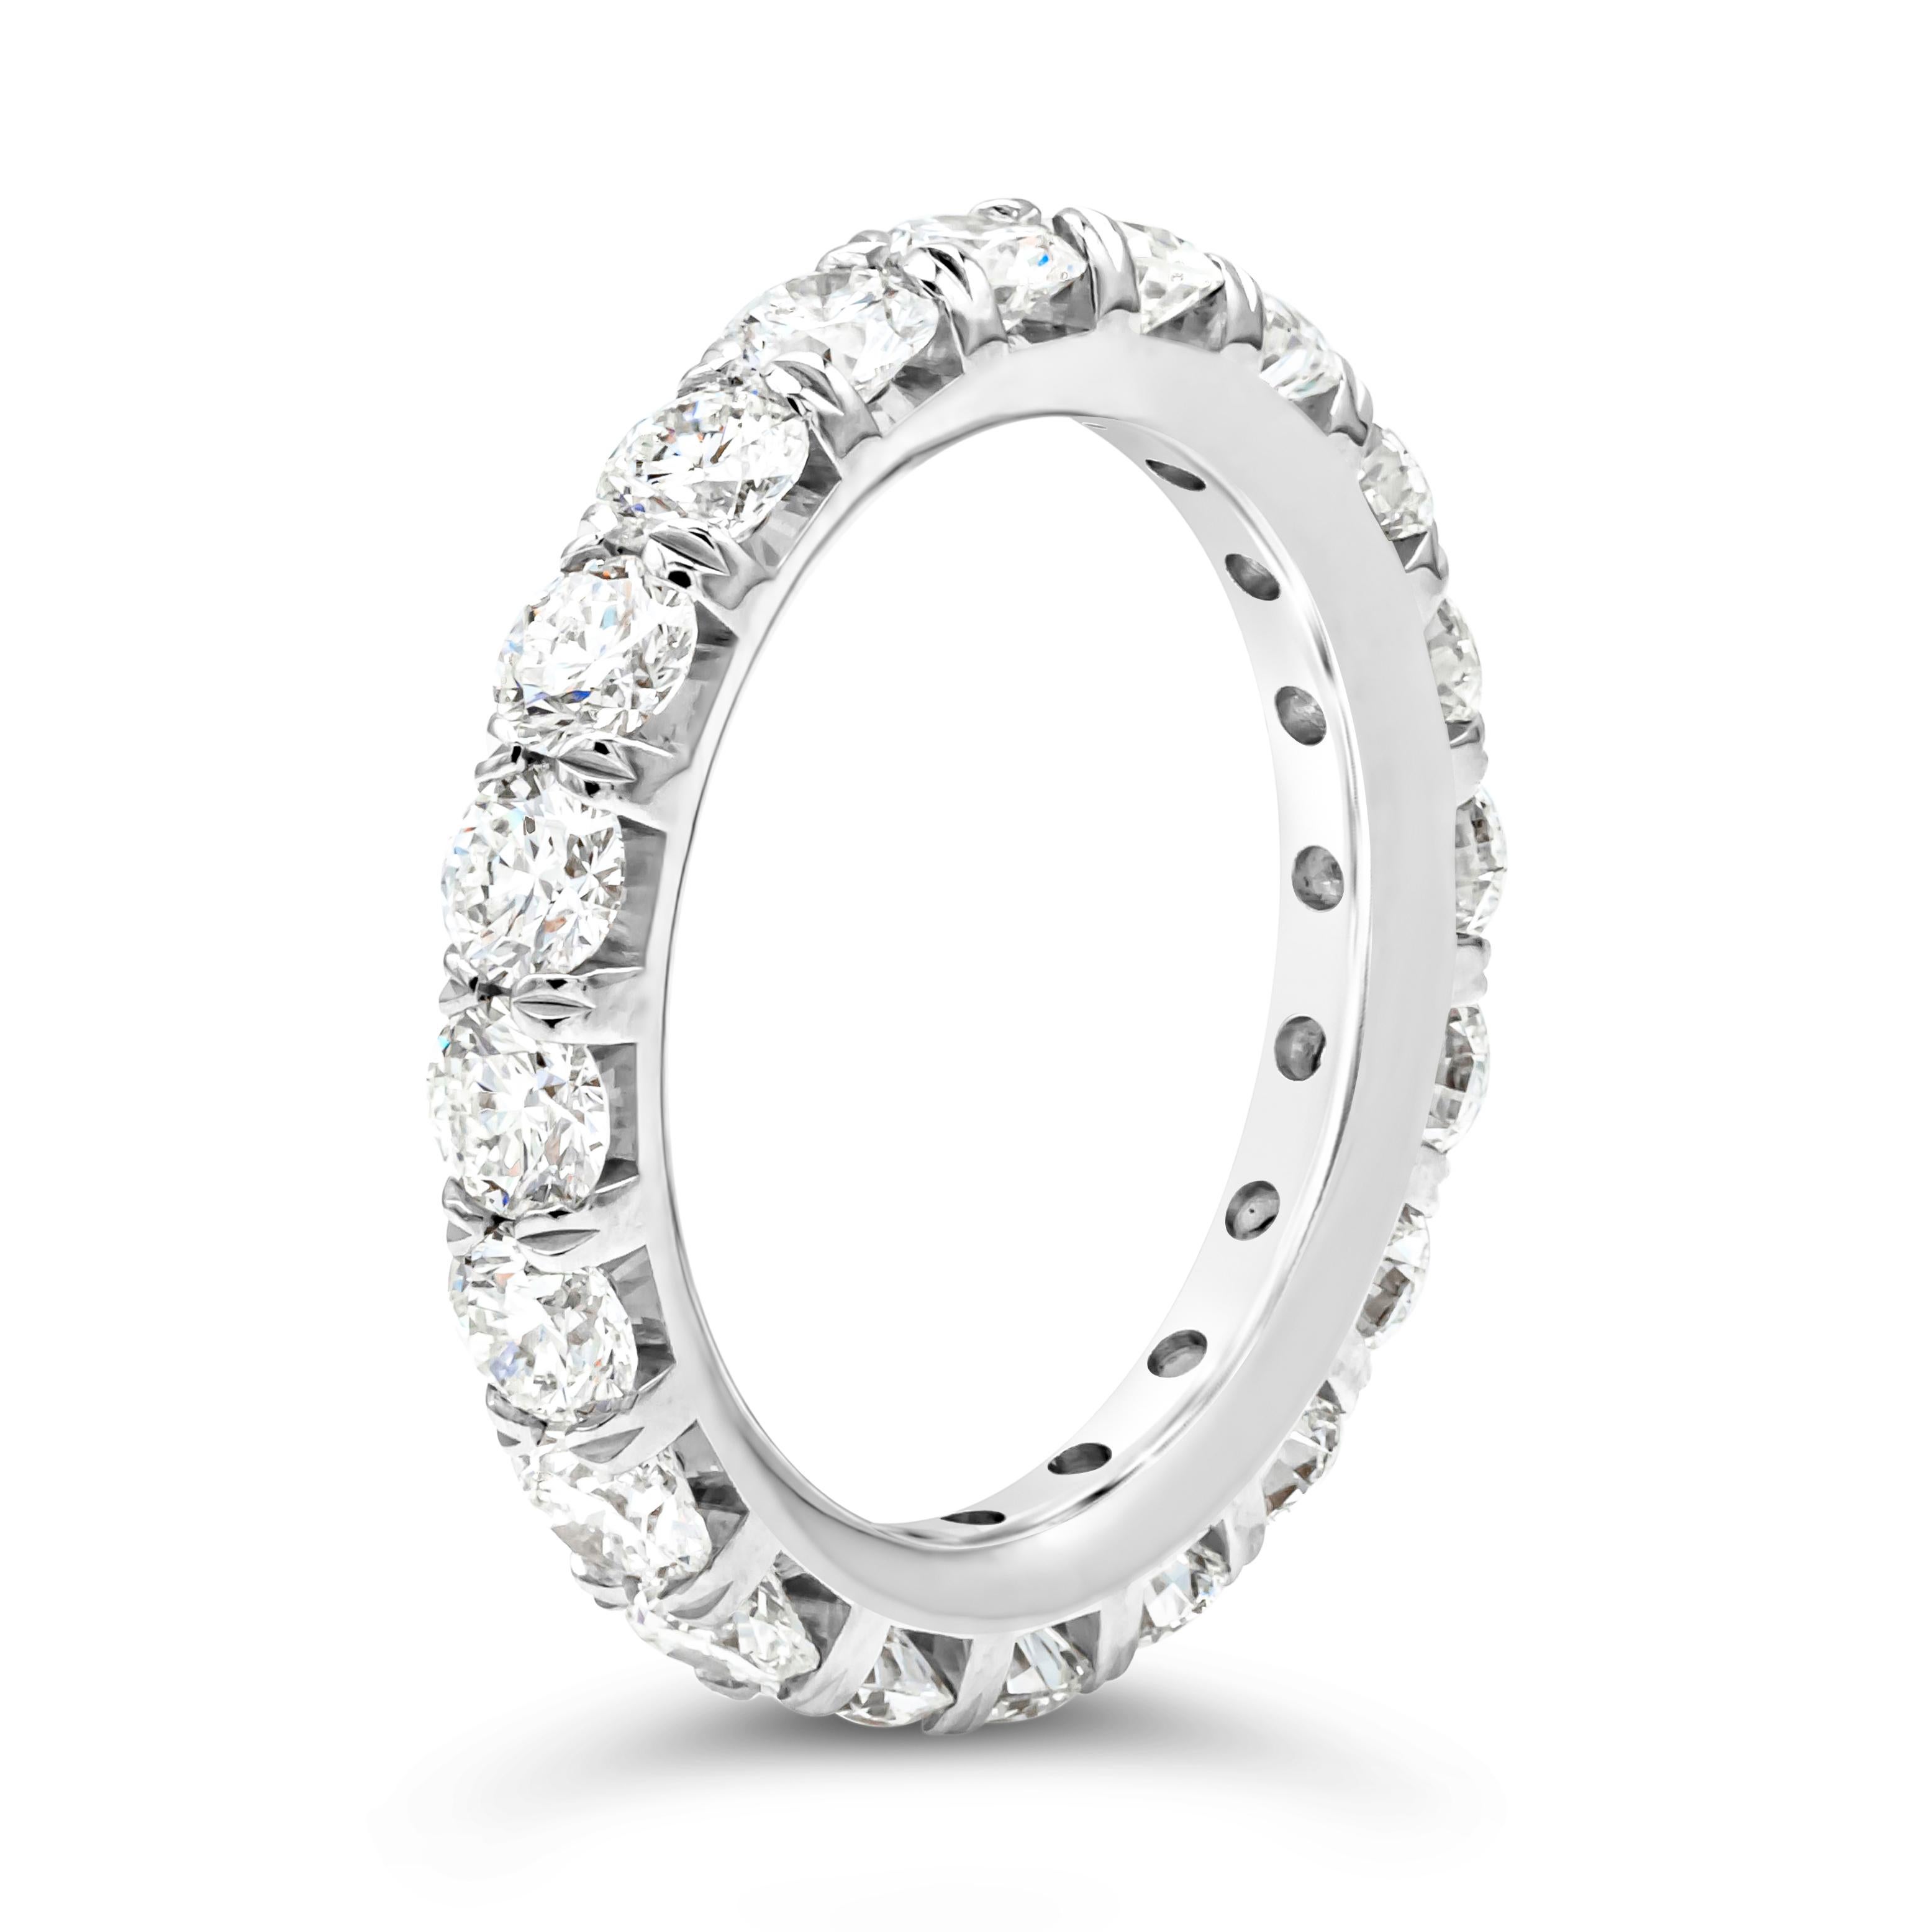 This classic eternity wedding band showcases a line of 20 brilliant round cut diamonds weighing 2.95 carats total, G color and VS in clarity, set in a four prong basket setting and French pave set. Finely made in platinum. Size 6.5 US resizable upon